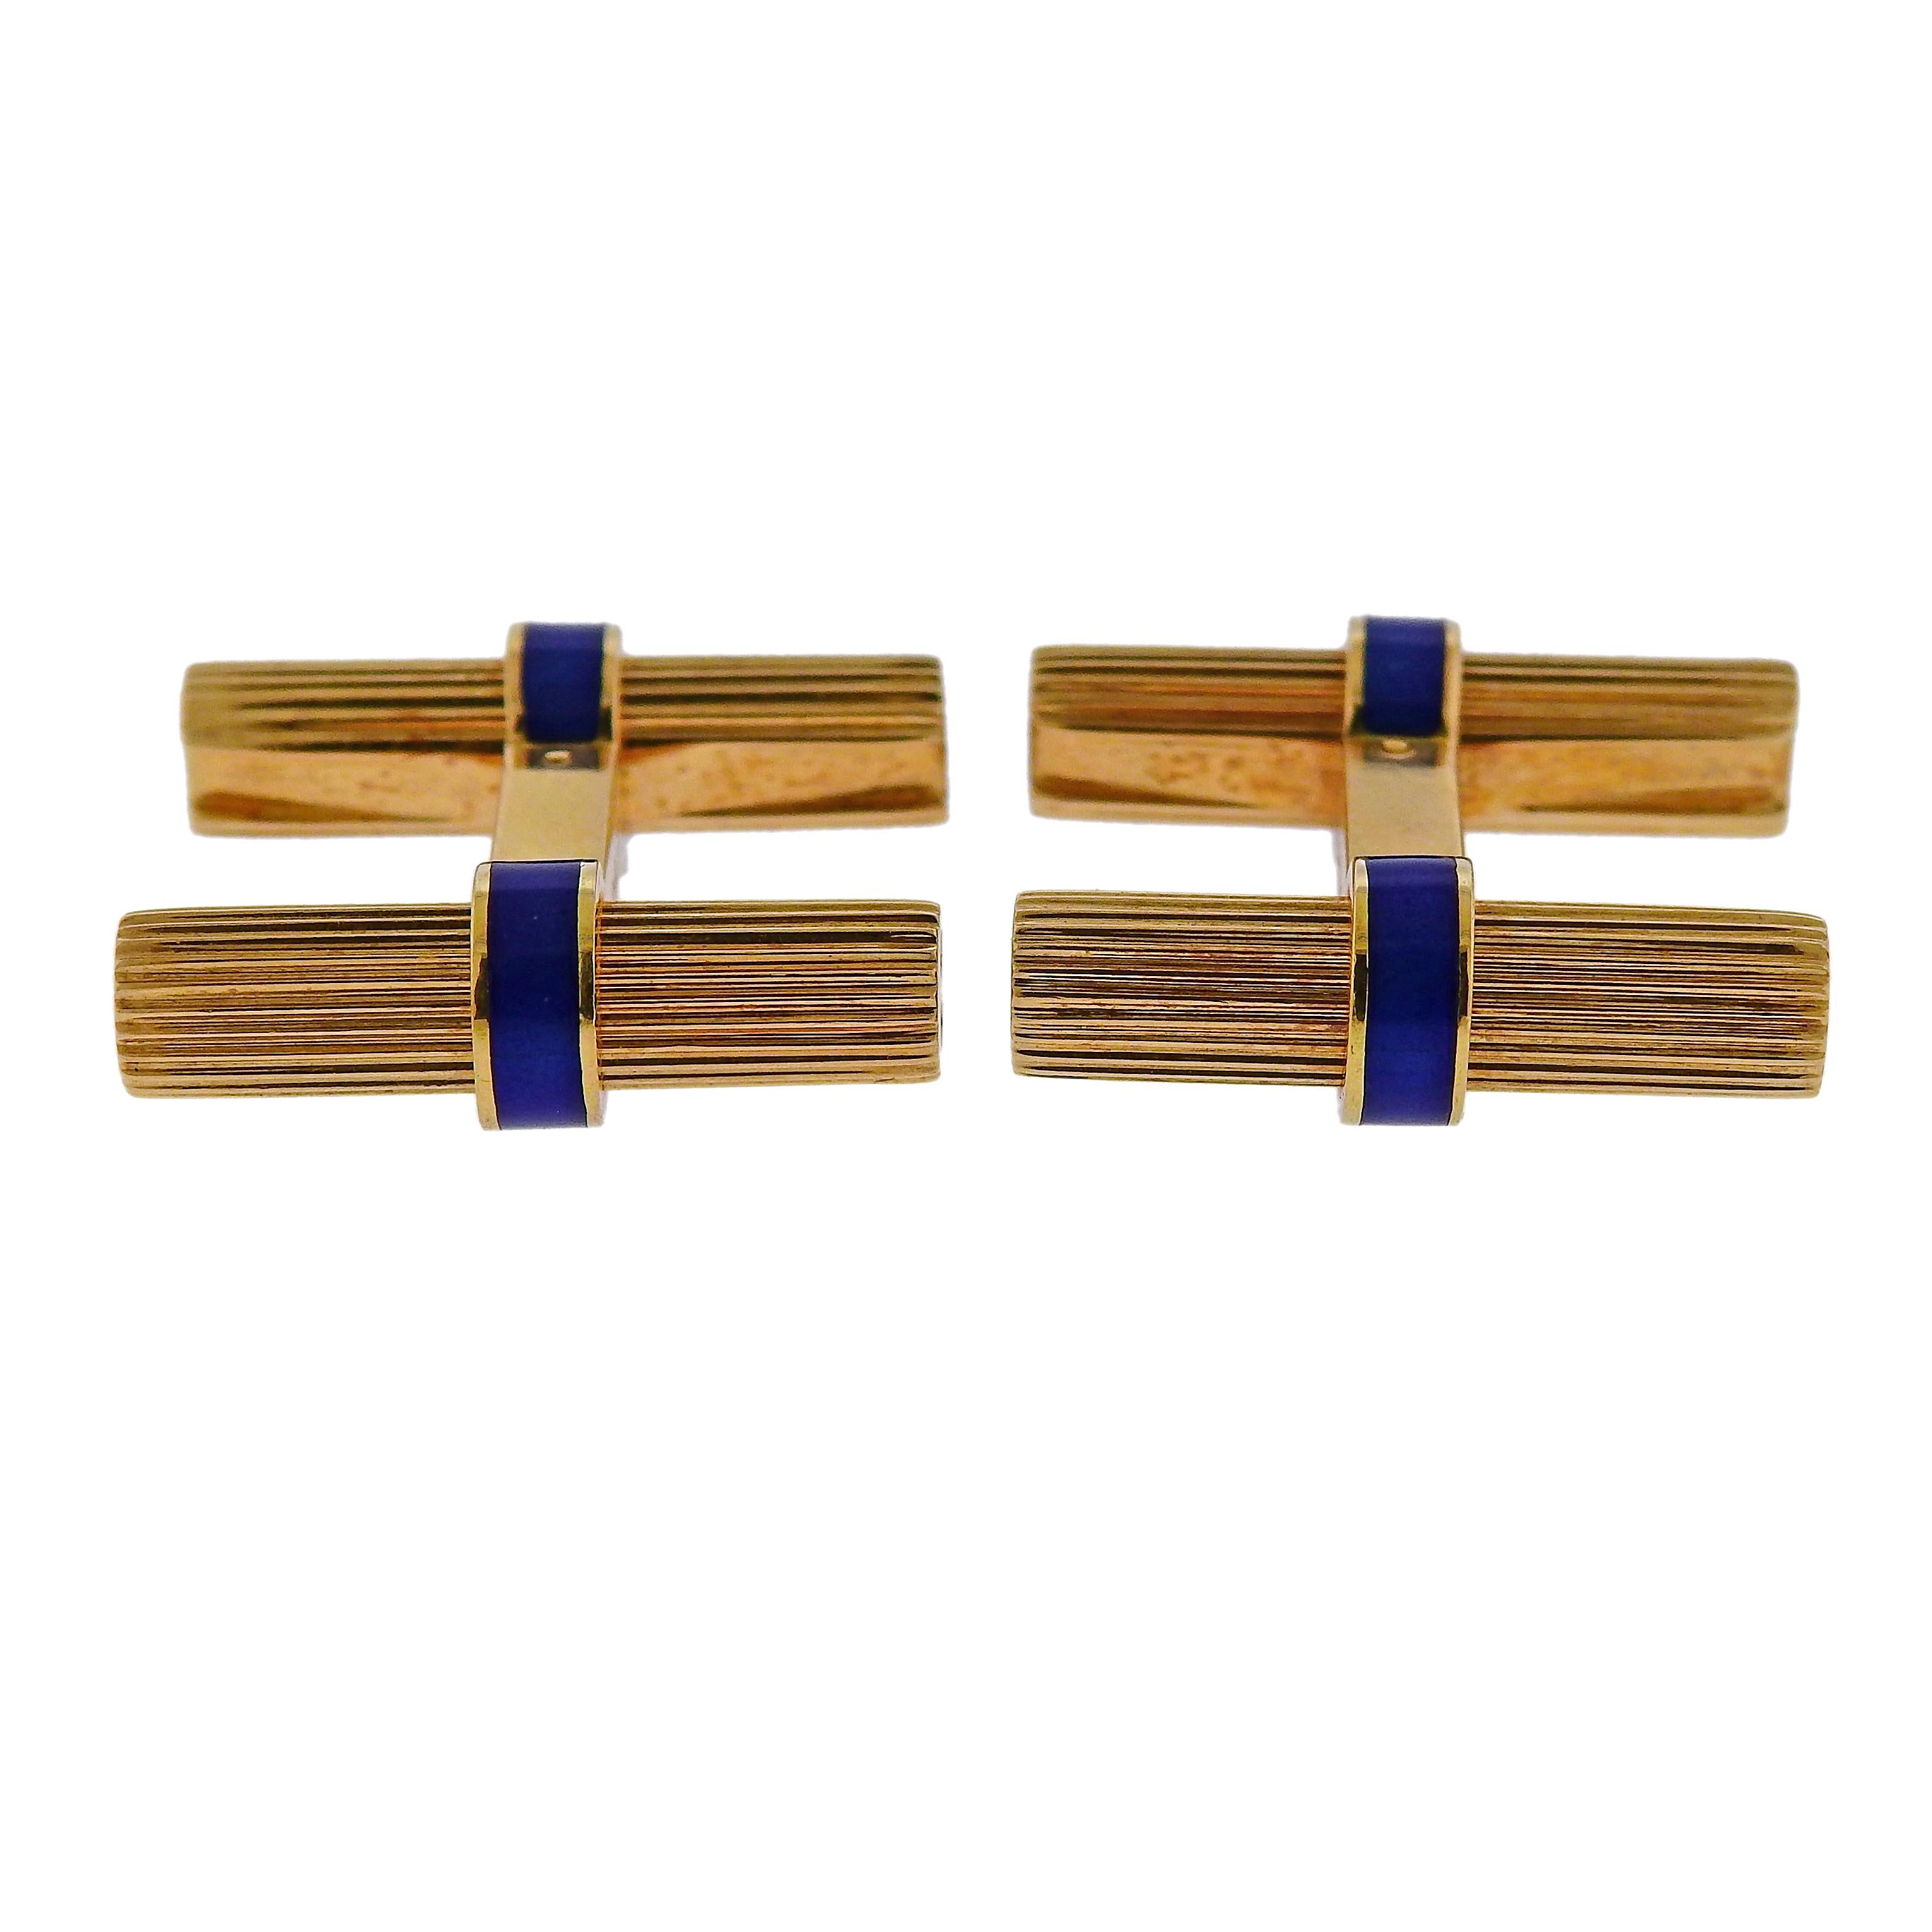 Pair of classic Mid century 18k gold bar cufflinks by Cartier, decorated with blue enamel. Each cufflink top is 22mm x 7mm, total weight is 13.6 grams. Marked Cartier, 750, 673059, OR750.